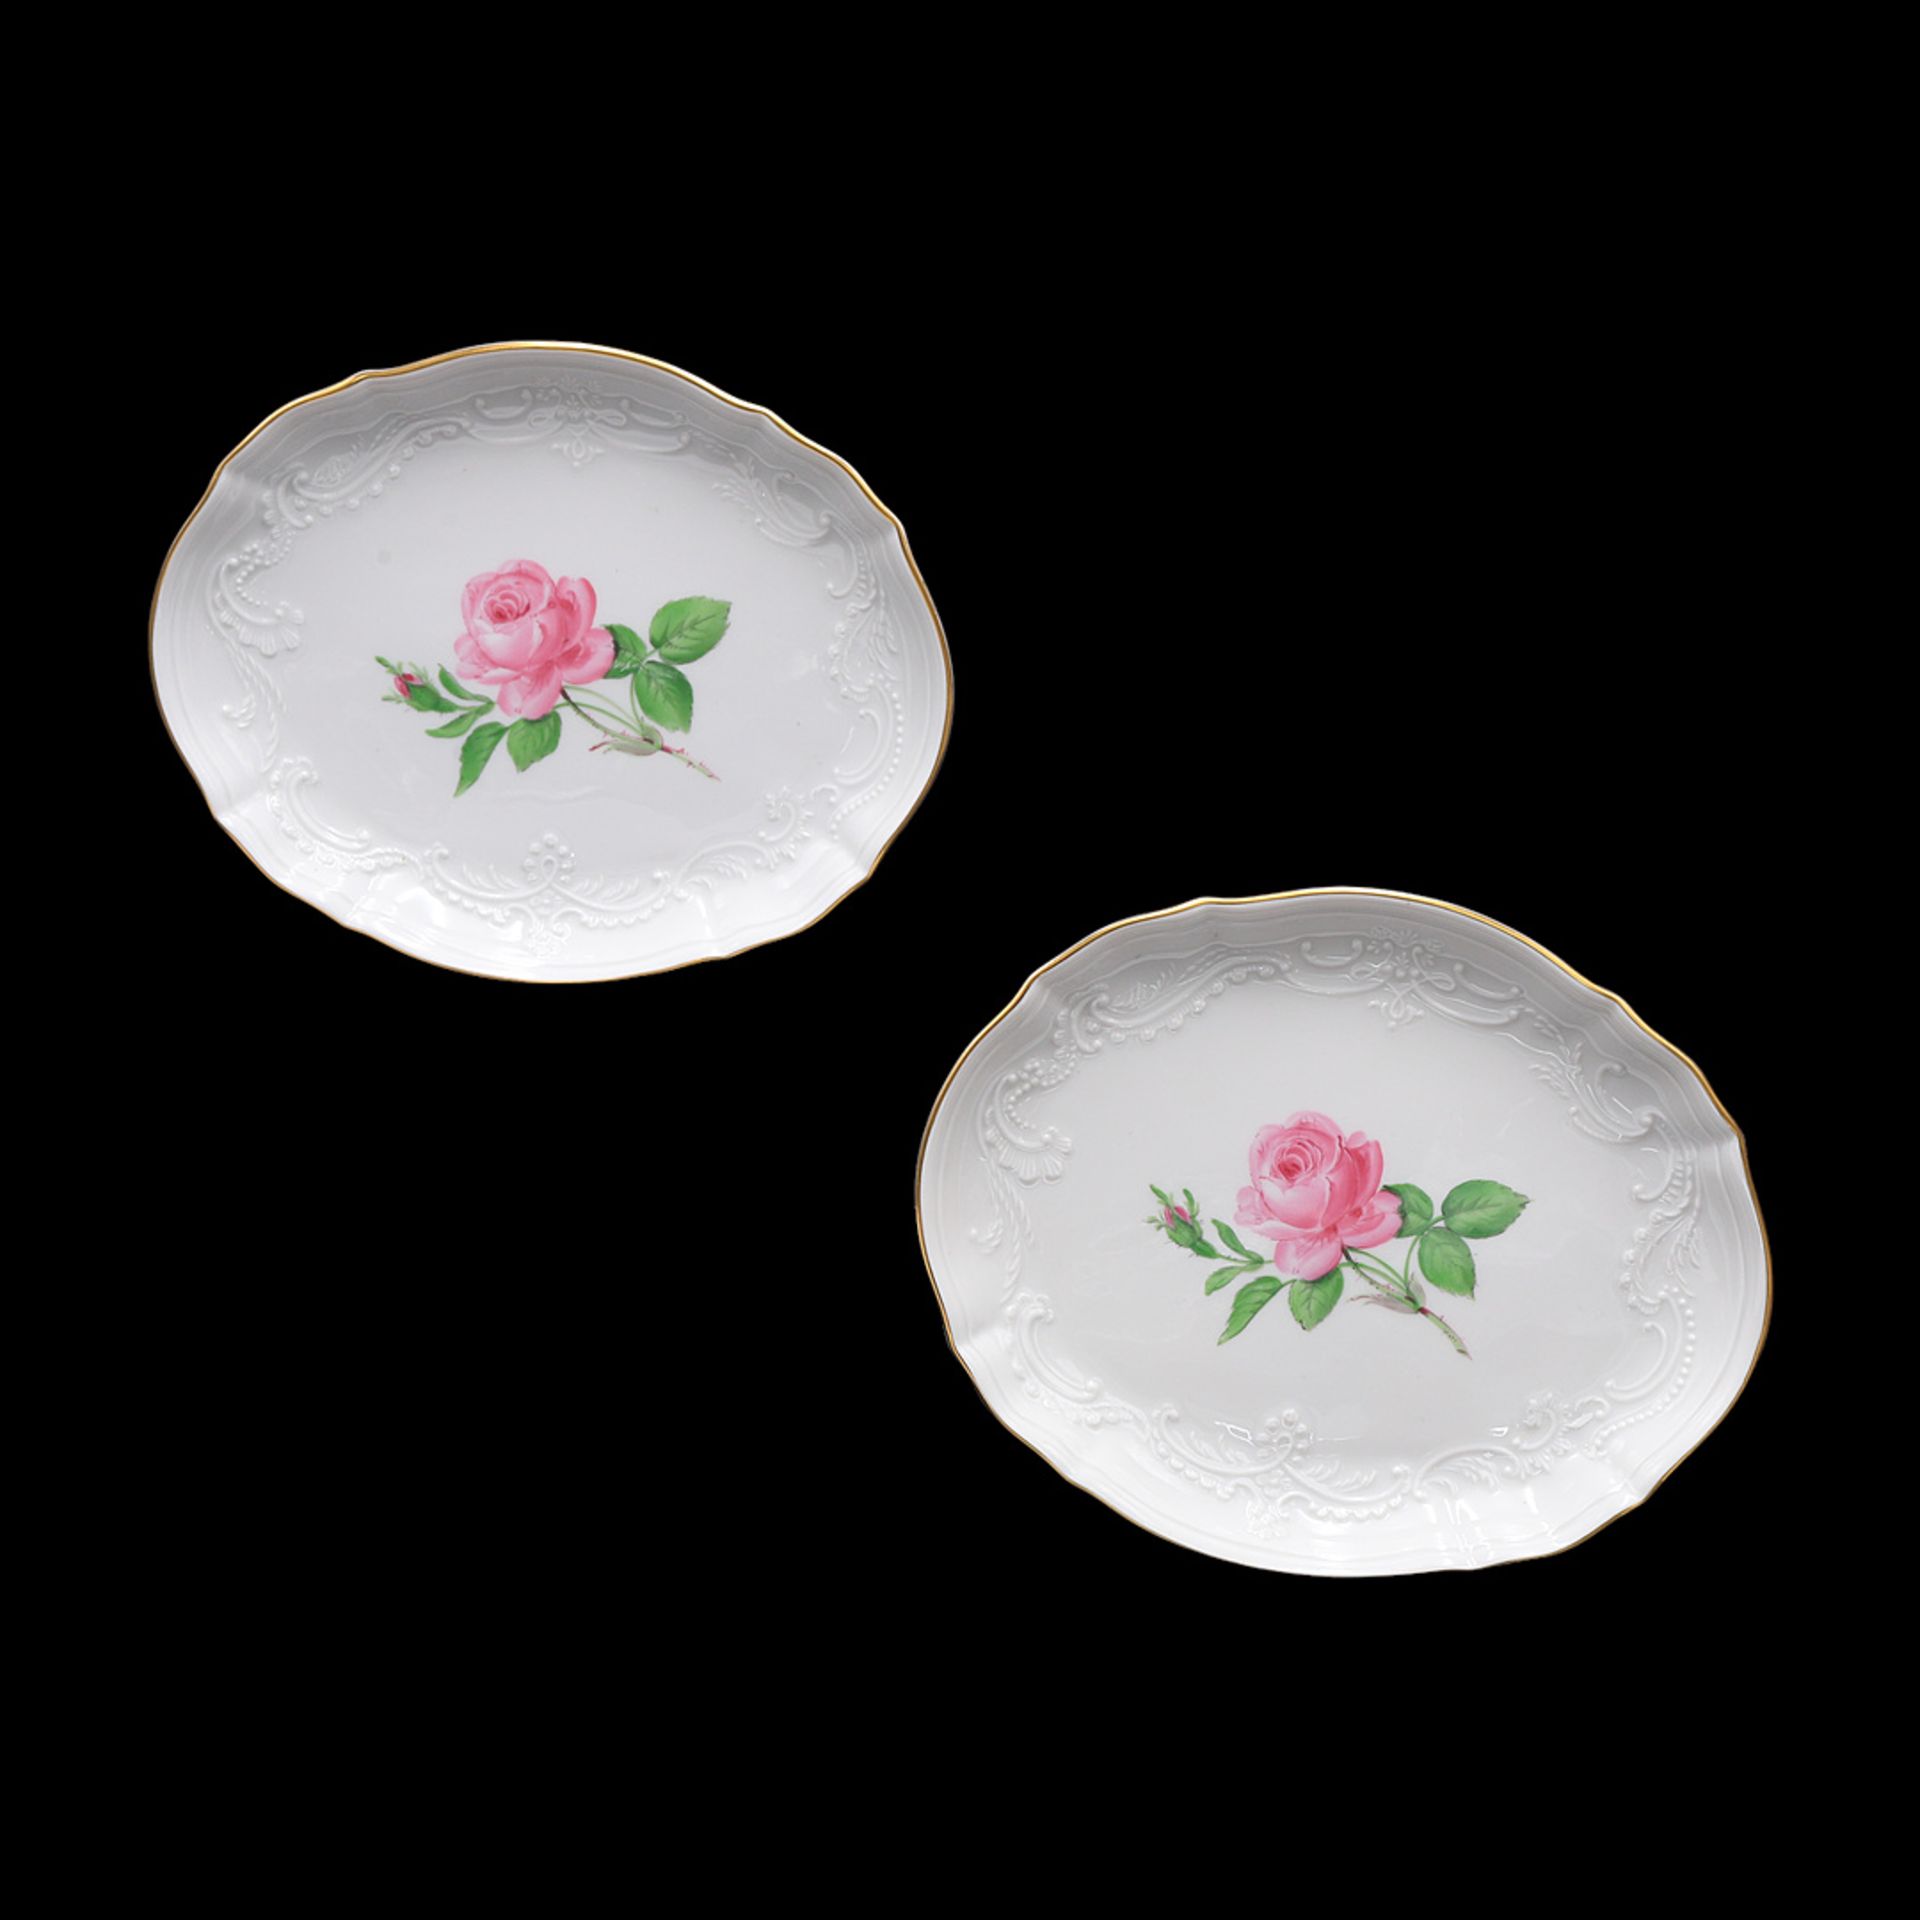 Two Meissen bowls with red roses